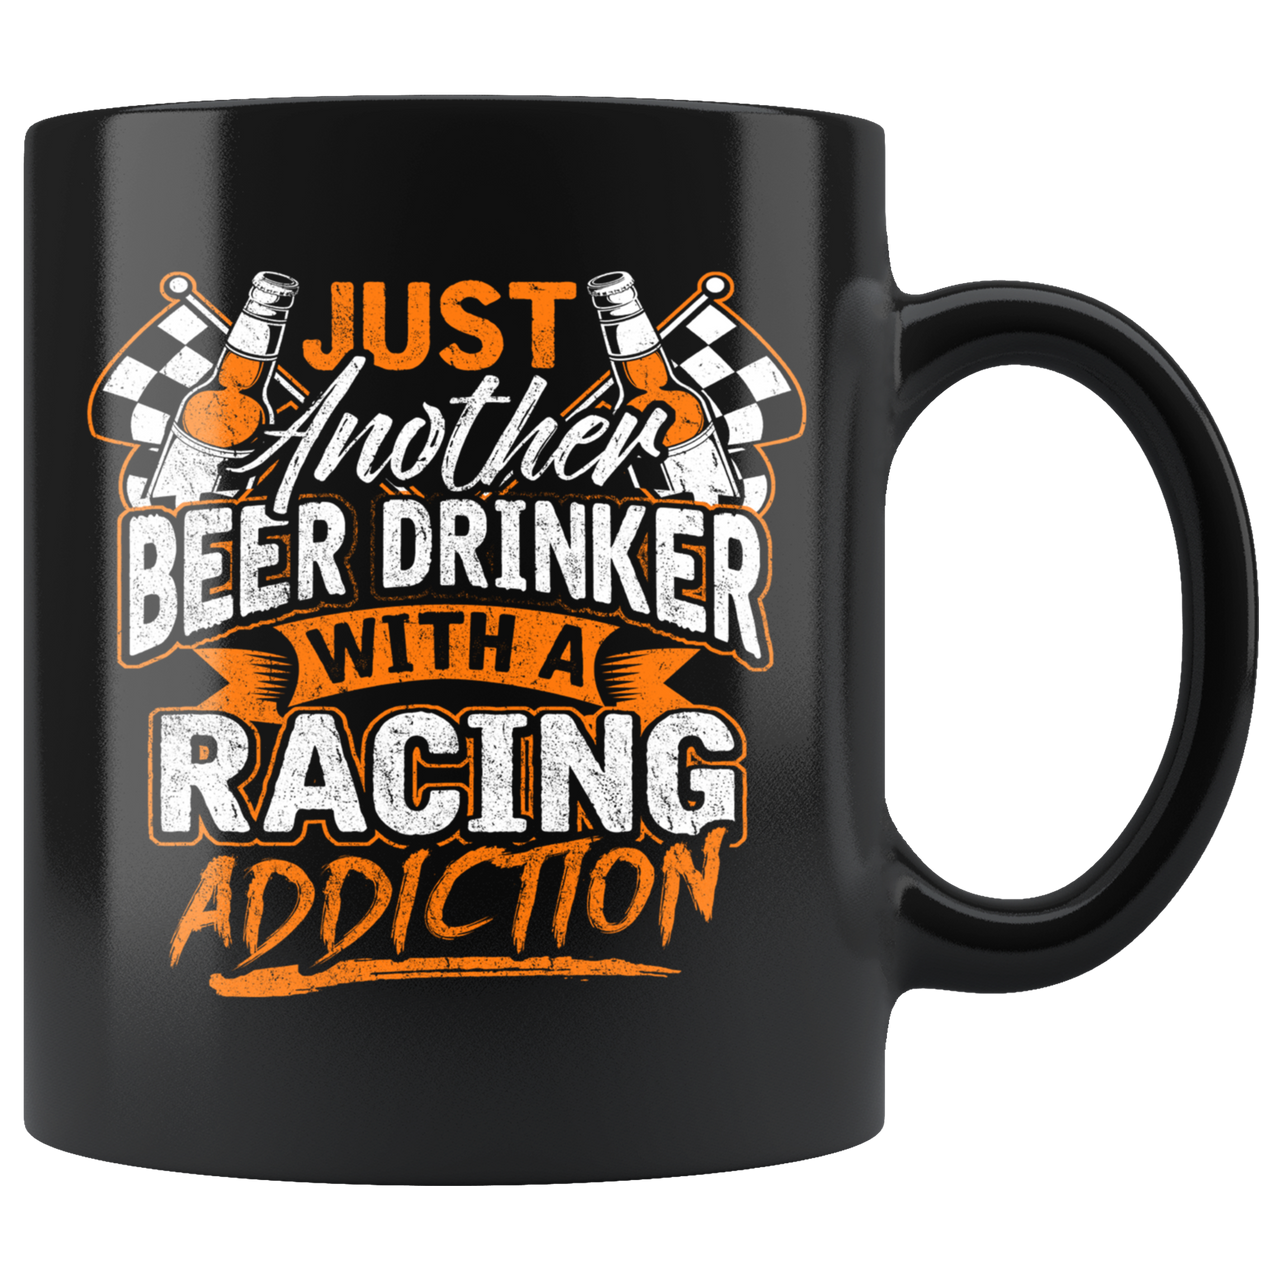 Just Another Beer Drinker With Racing Problem Mug!